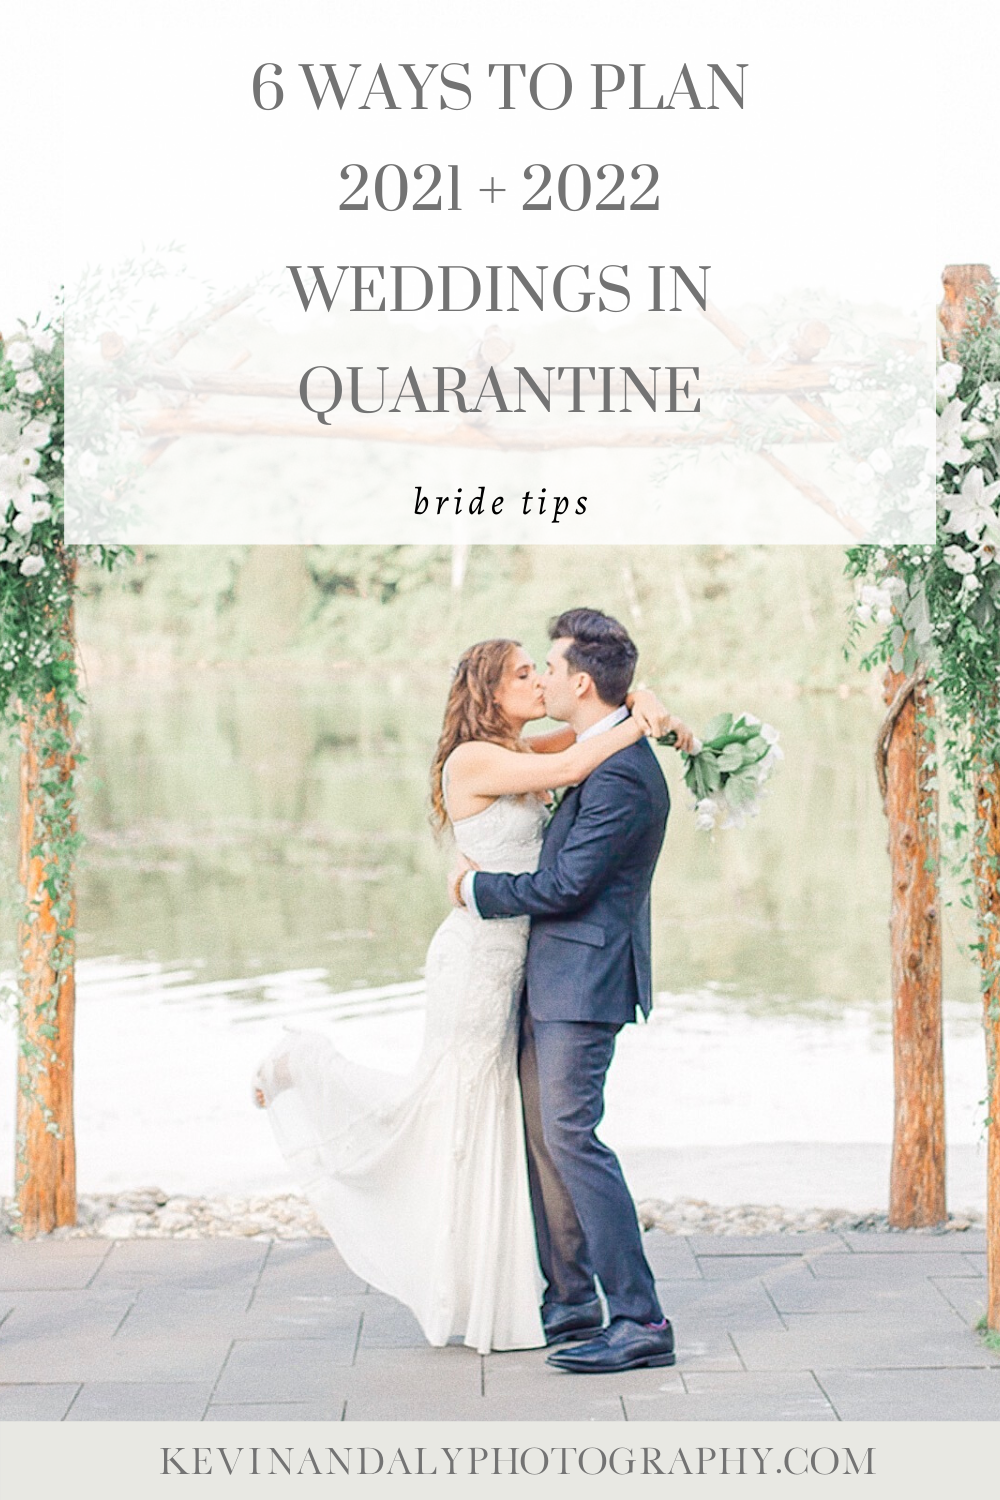 blog post on planning a 2021 or 22 wedding during quarantine